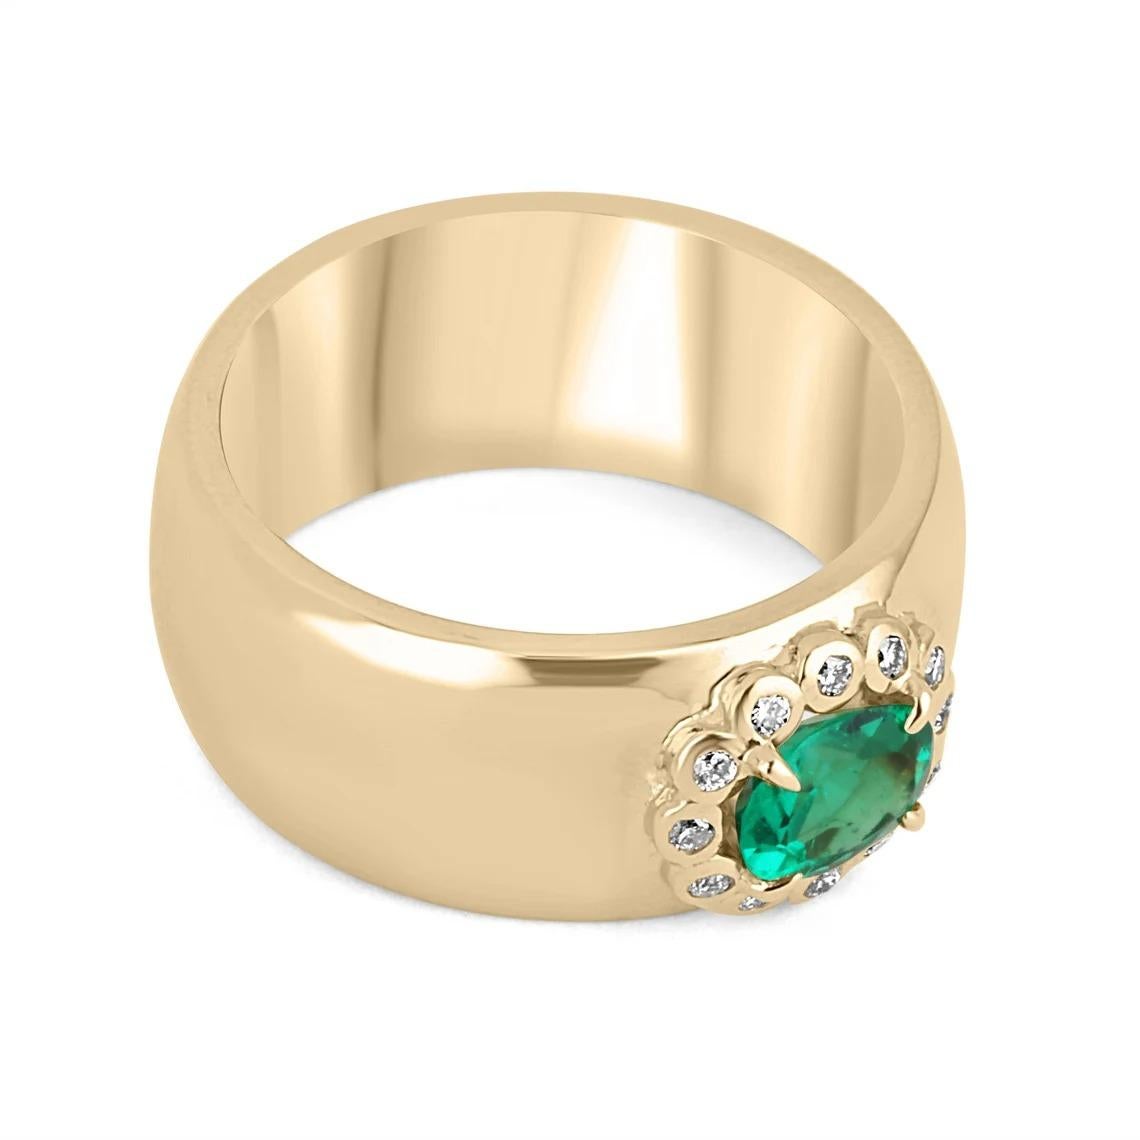 A breath-taking, emerald and diamond statement ring. This gorgeous piece features a 1.0-carat, fine-quality Colombian emerald. The center gemstone displayed a desirable, vivid-green color with excellent eye clarity among its other superb